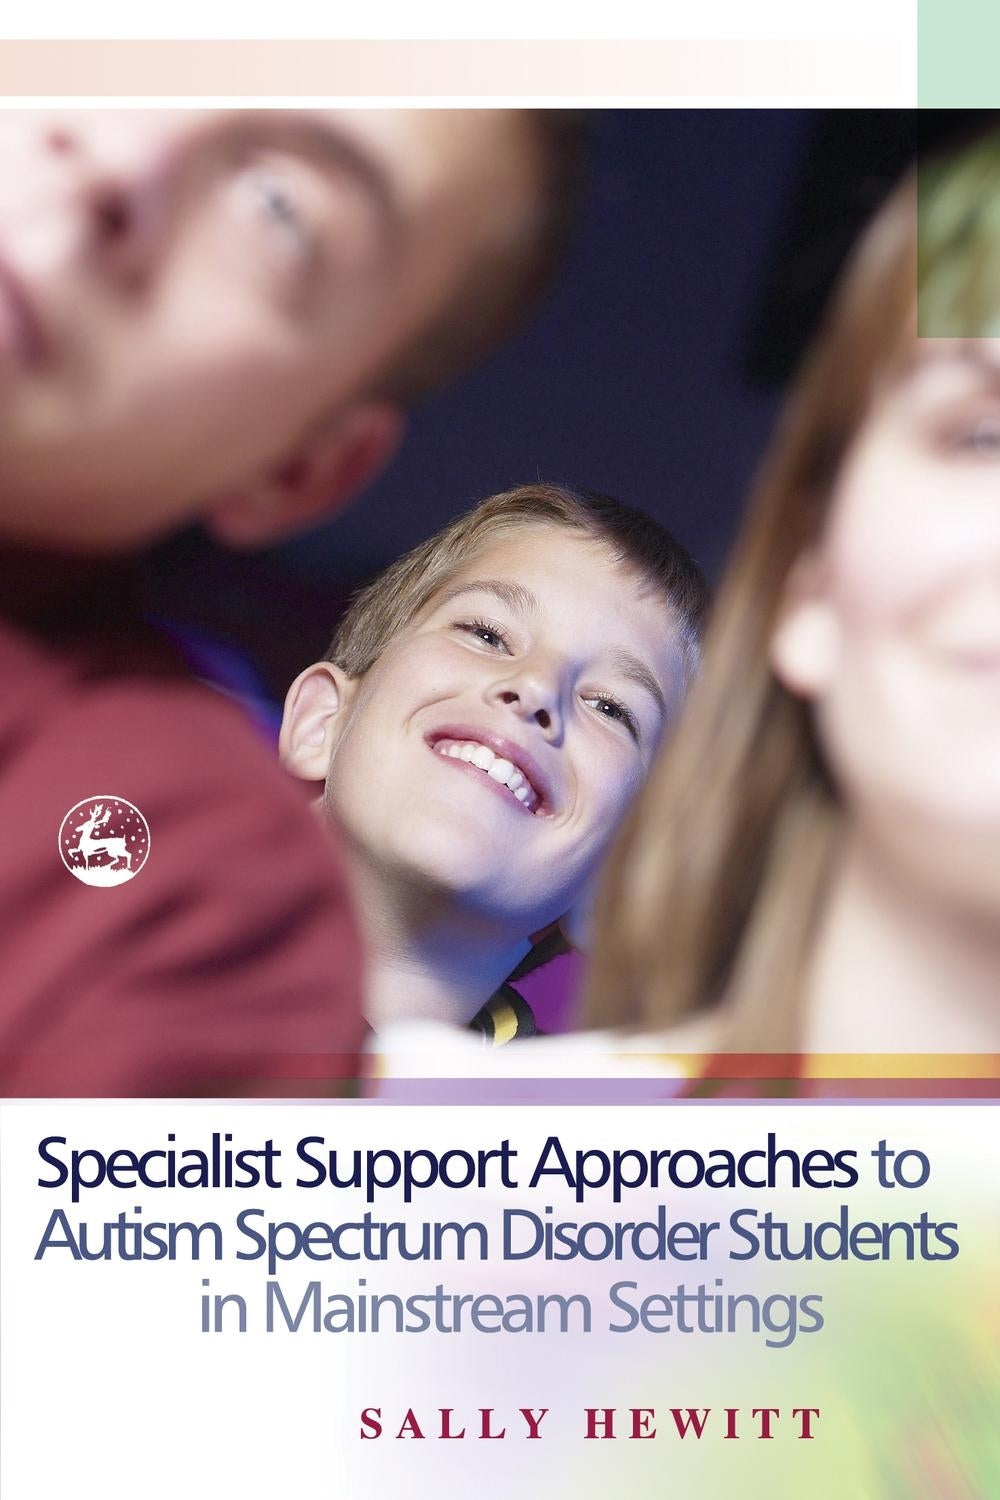 Specialist Support Approaches to Autism Spectrum Disorder Students in Mainstream Settings by Sally Hewitt